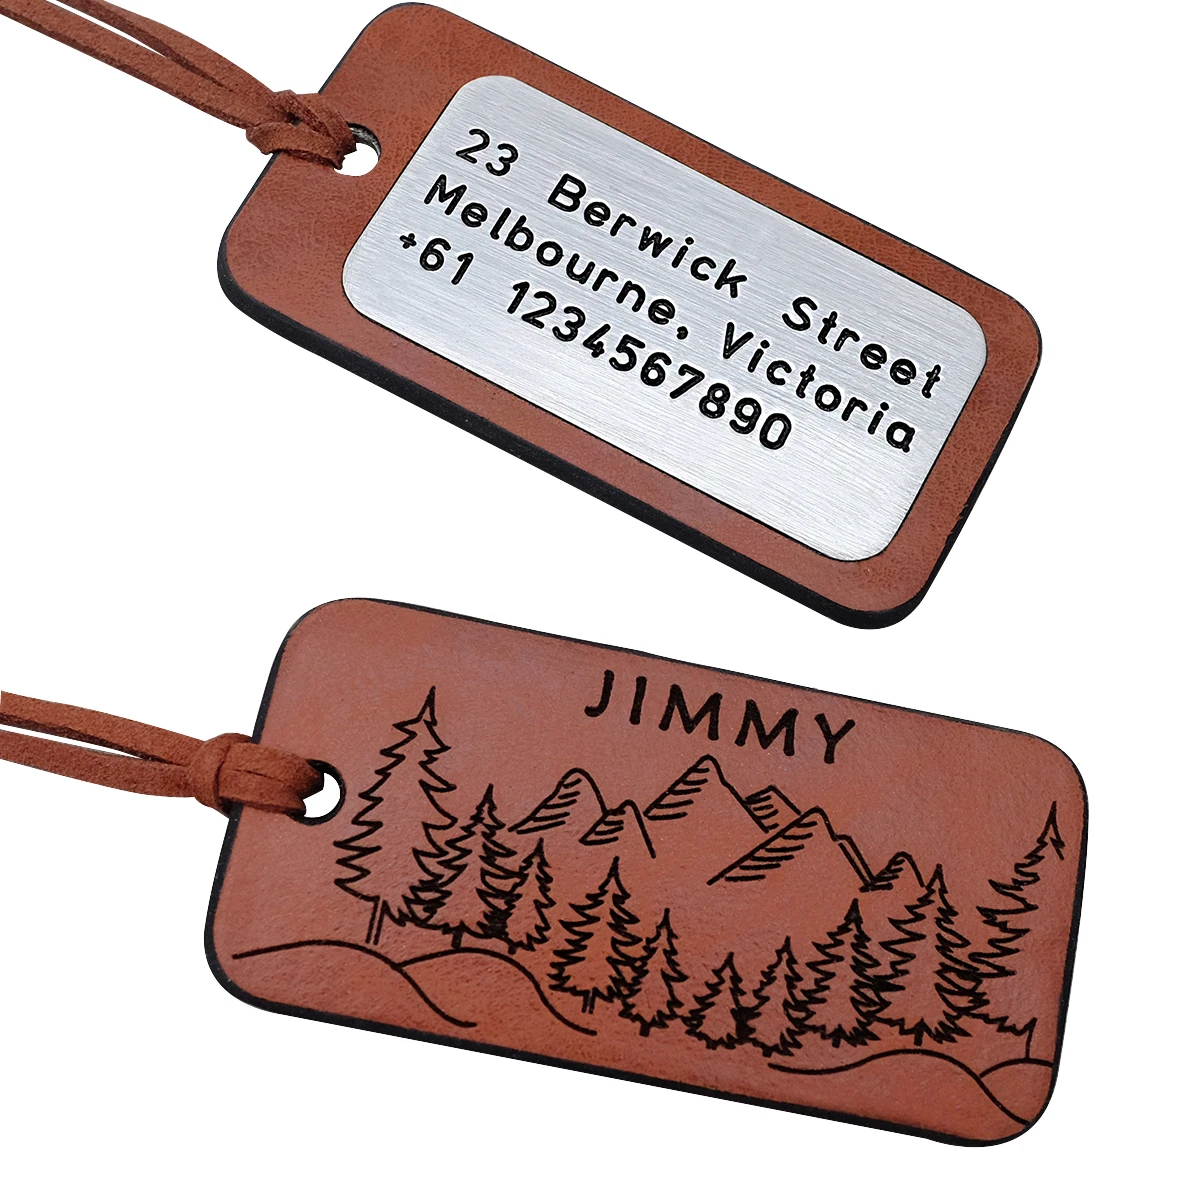 Custom Luggage Tag Personalized Name Bag Tag with Address Backpack Tag School Bag Travel Baggage Tag Personalized Travel Gift new aluminium travel luggage baggage tag suitcase identity address name labels id address tags bus card